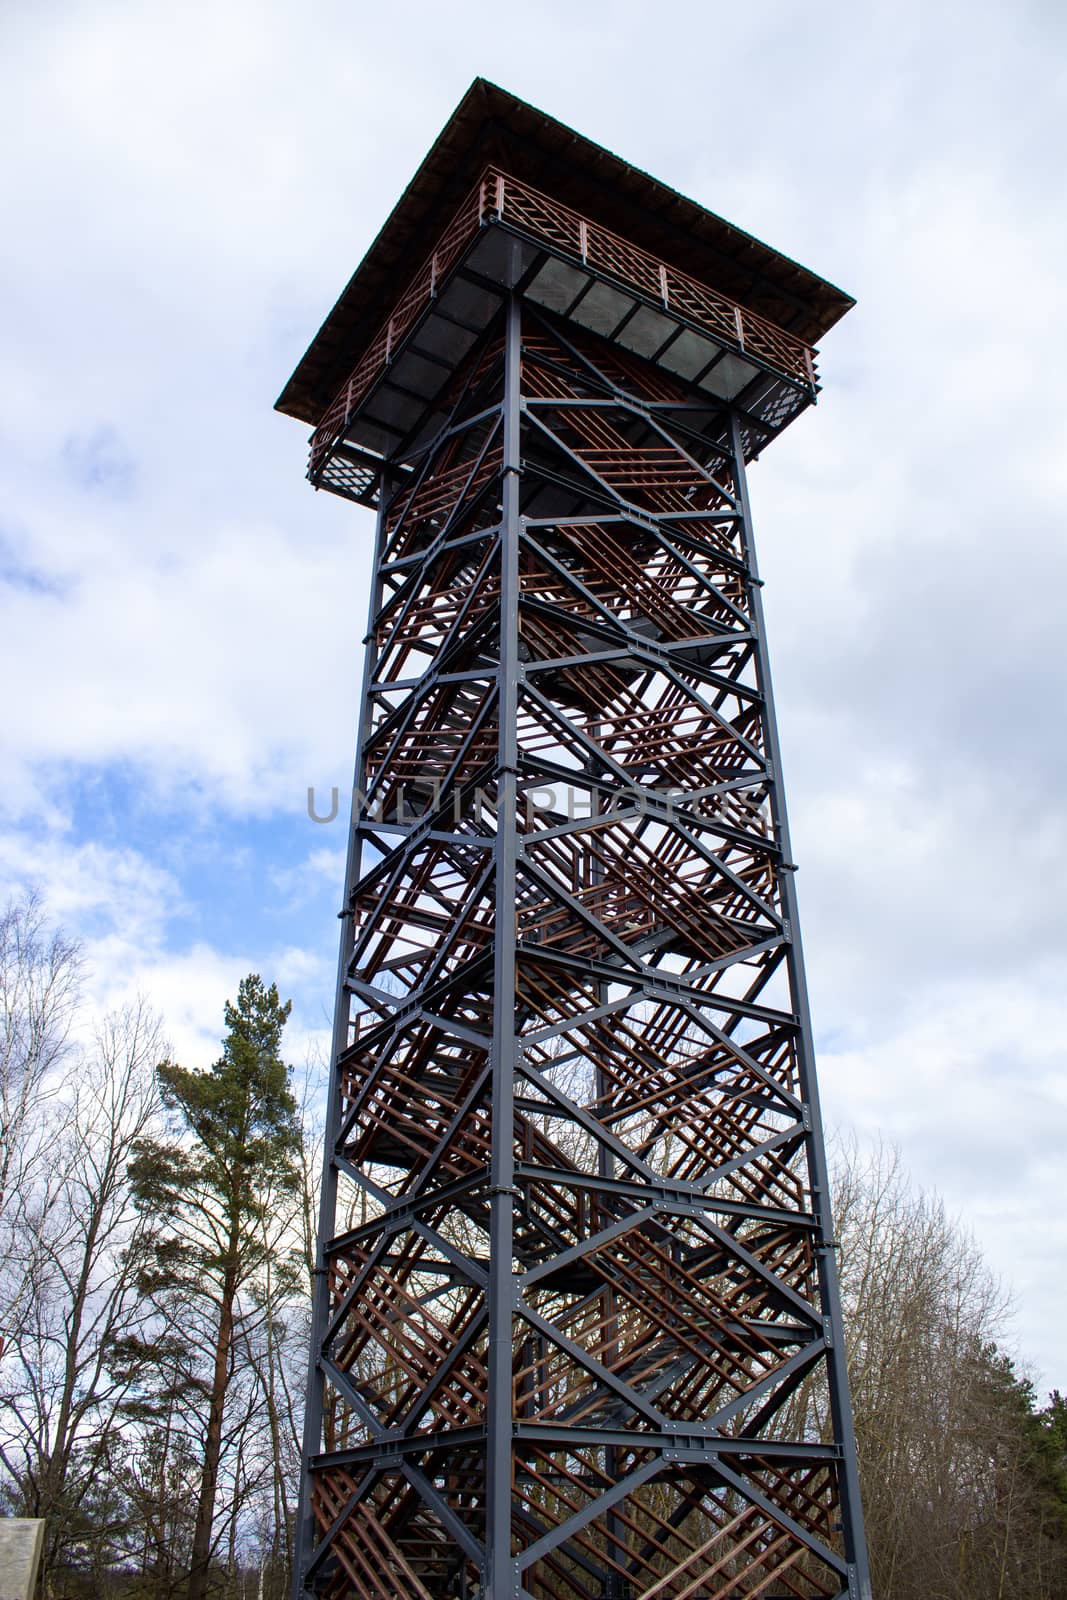 High, metal observation tower in Latvia, Baltic States.